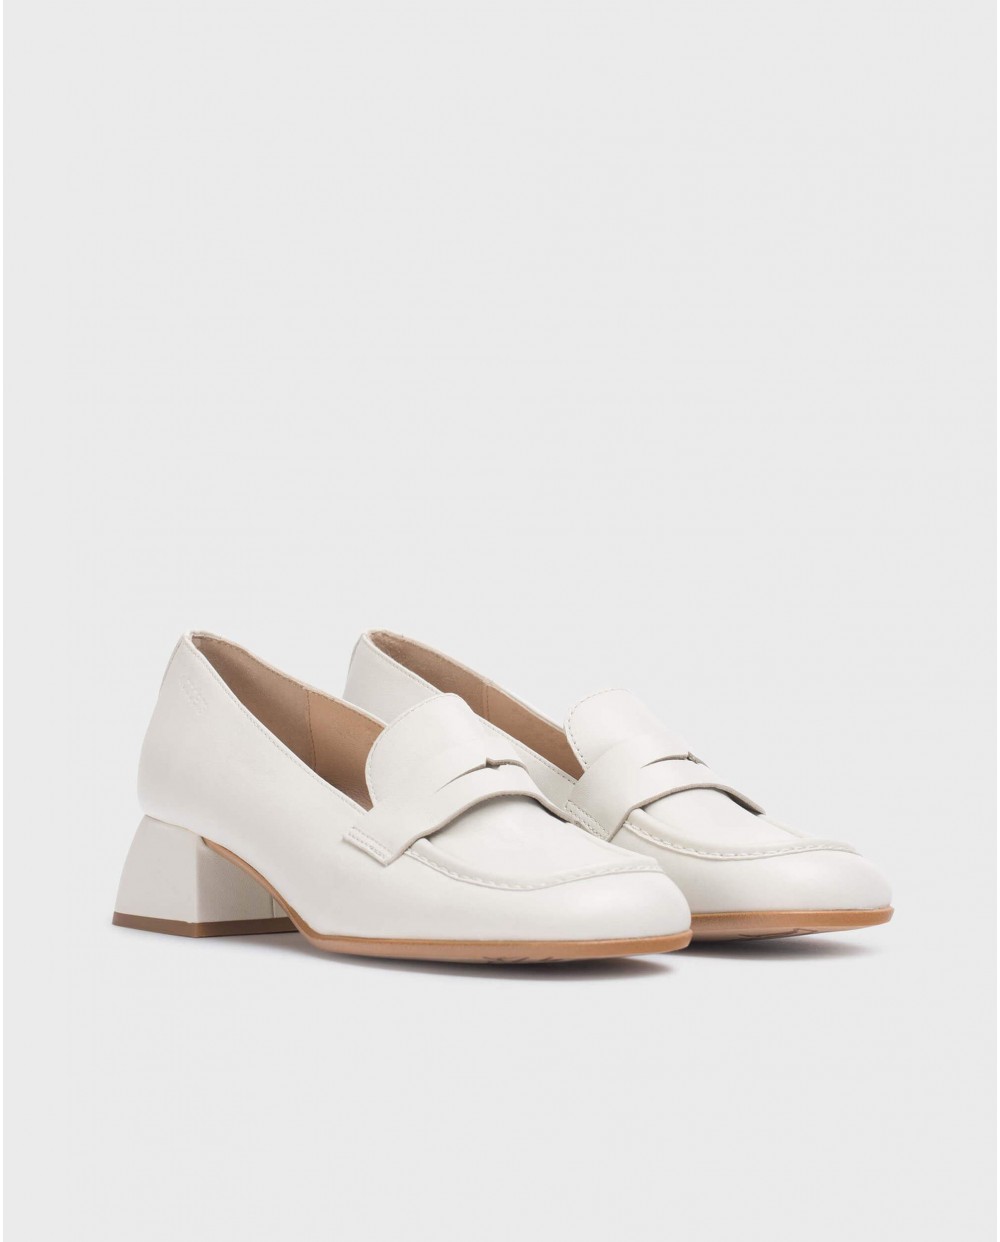 Wonders-Loafers-White Gift moccasin